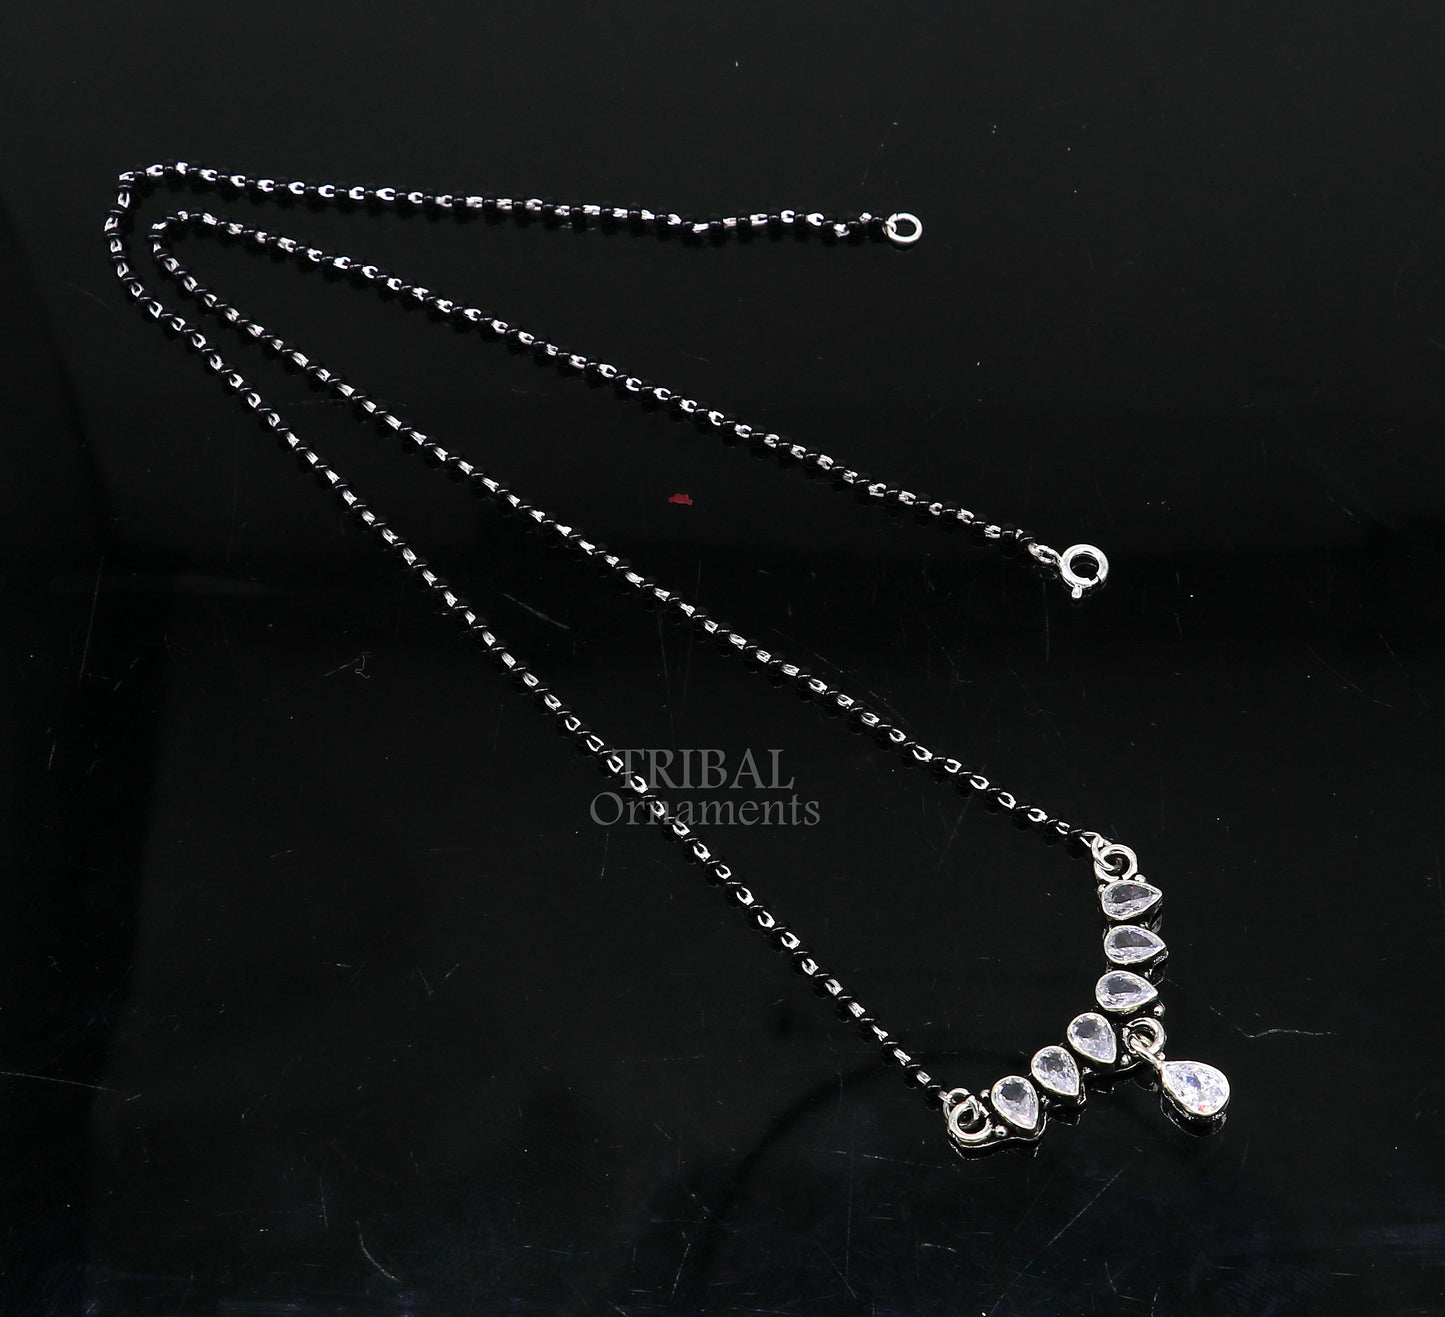 Awesome 925 sterling silver black beads chain necklace, gorgeous flower design pendant, traditional style brides Mangalsutra necklace MS01 - TRIBAL ORNAMENTS